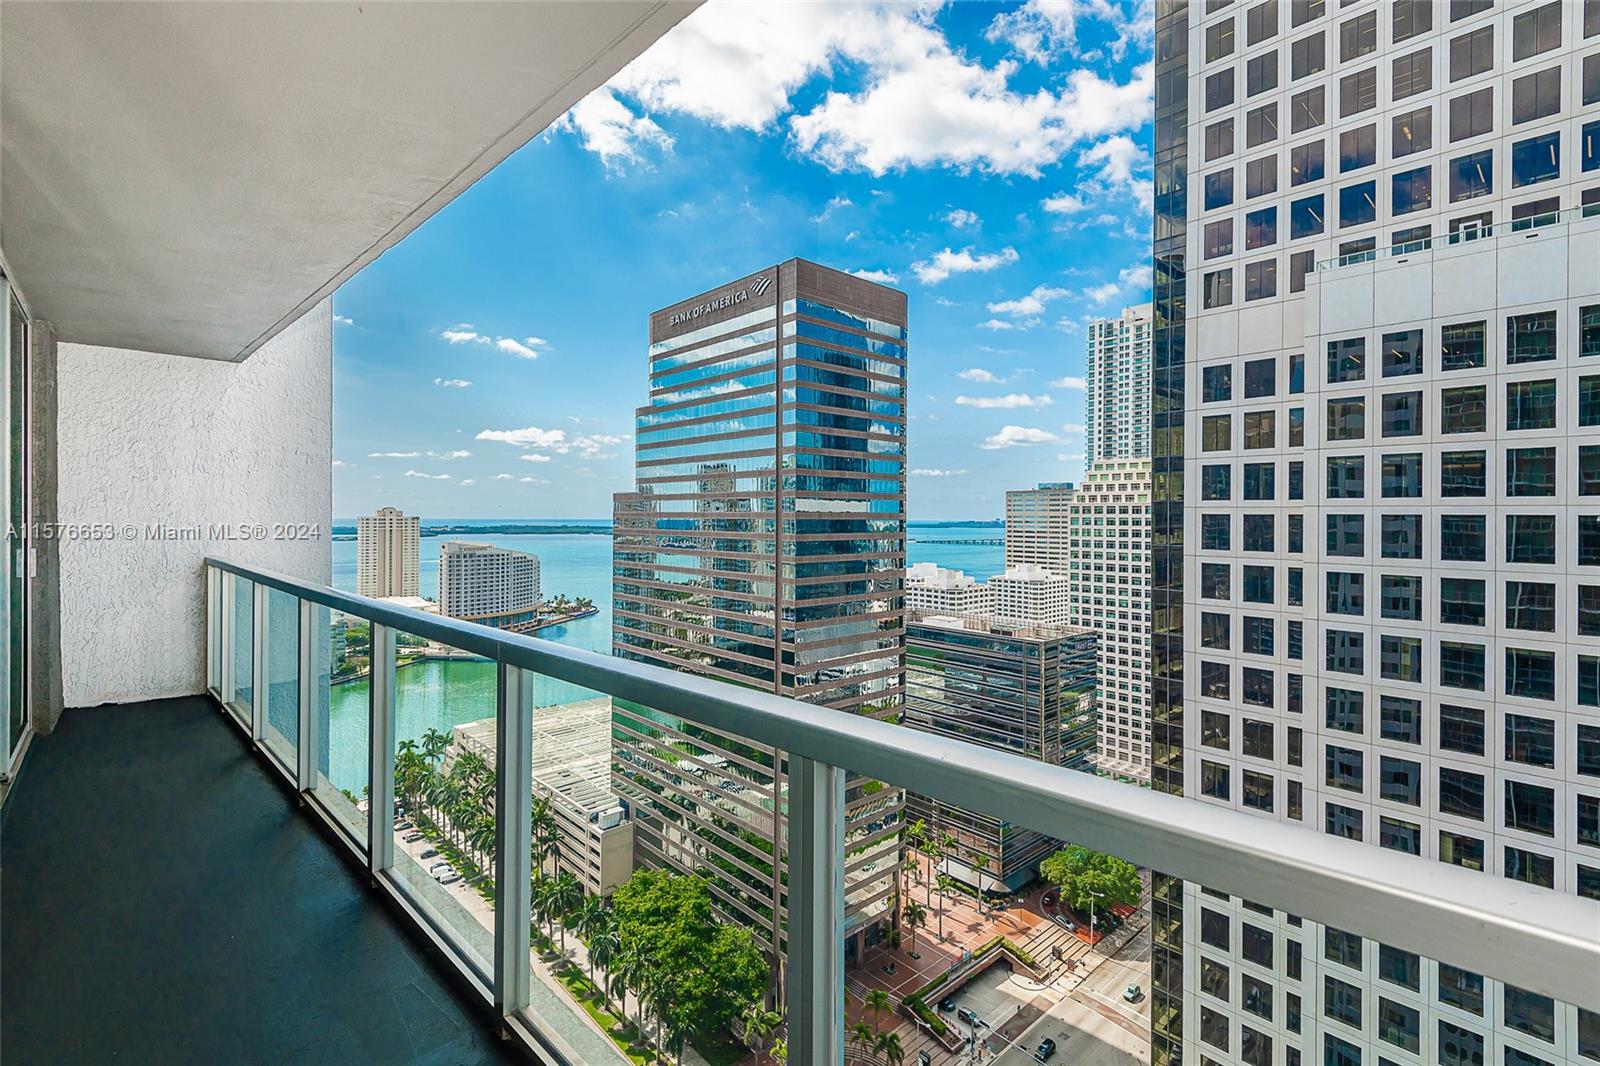 GORGEOUS 1/1 AT 500 BRICKELL (EAST TOWER)! STUNNING WATER/BAY, CITY/SKYLINE, BRICKELL CITY CTR VIEWS! EXCELLENT LOCATION. SOUGHT AFTER BRICKELL AVENUE. 31ST FLOOR UNIT. HUGE BALCONY. EURO STYLE KITCHEN. QUARTZ C-TOPS. S/S APPLIANCES. WASHER/DRYER IN UNIT. SPACIOUS LIVING/DINING ROOM AREA OFFER NATURAL SUNLIGHT. MASTER BEDROOM FEATURES LARGE WALKIN CLOSET. MODERN BATHROOM FEATURES BOTH TUB + SHOWER. LUXURY BUILDING FEATURES INVITING LOBBY, 24HR ATTENDED FRONT DESK, 2 POOLS (INCLUDING ROOFTOP), THEATER, PARTY/CLUB ROOM, GYM, SAUNA, VALET PARKING AND MUCH MORE. UNIT COMES WITH 1 ASSIGNED PARKING SPACE. HANDFUL OF DOWNSTAIRS RESTAURANTS & CAFES. ACROSS THE STREET FROM BRICKELL CITY CENTER, STEPS TO MARY BRICKELL VILLAGE, MIAMI RIVER & DOWNTOWN MIAMI. FRESHLY PAINTED AND READY FOR OCCUPANCY.